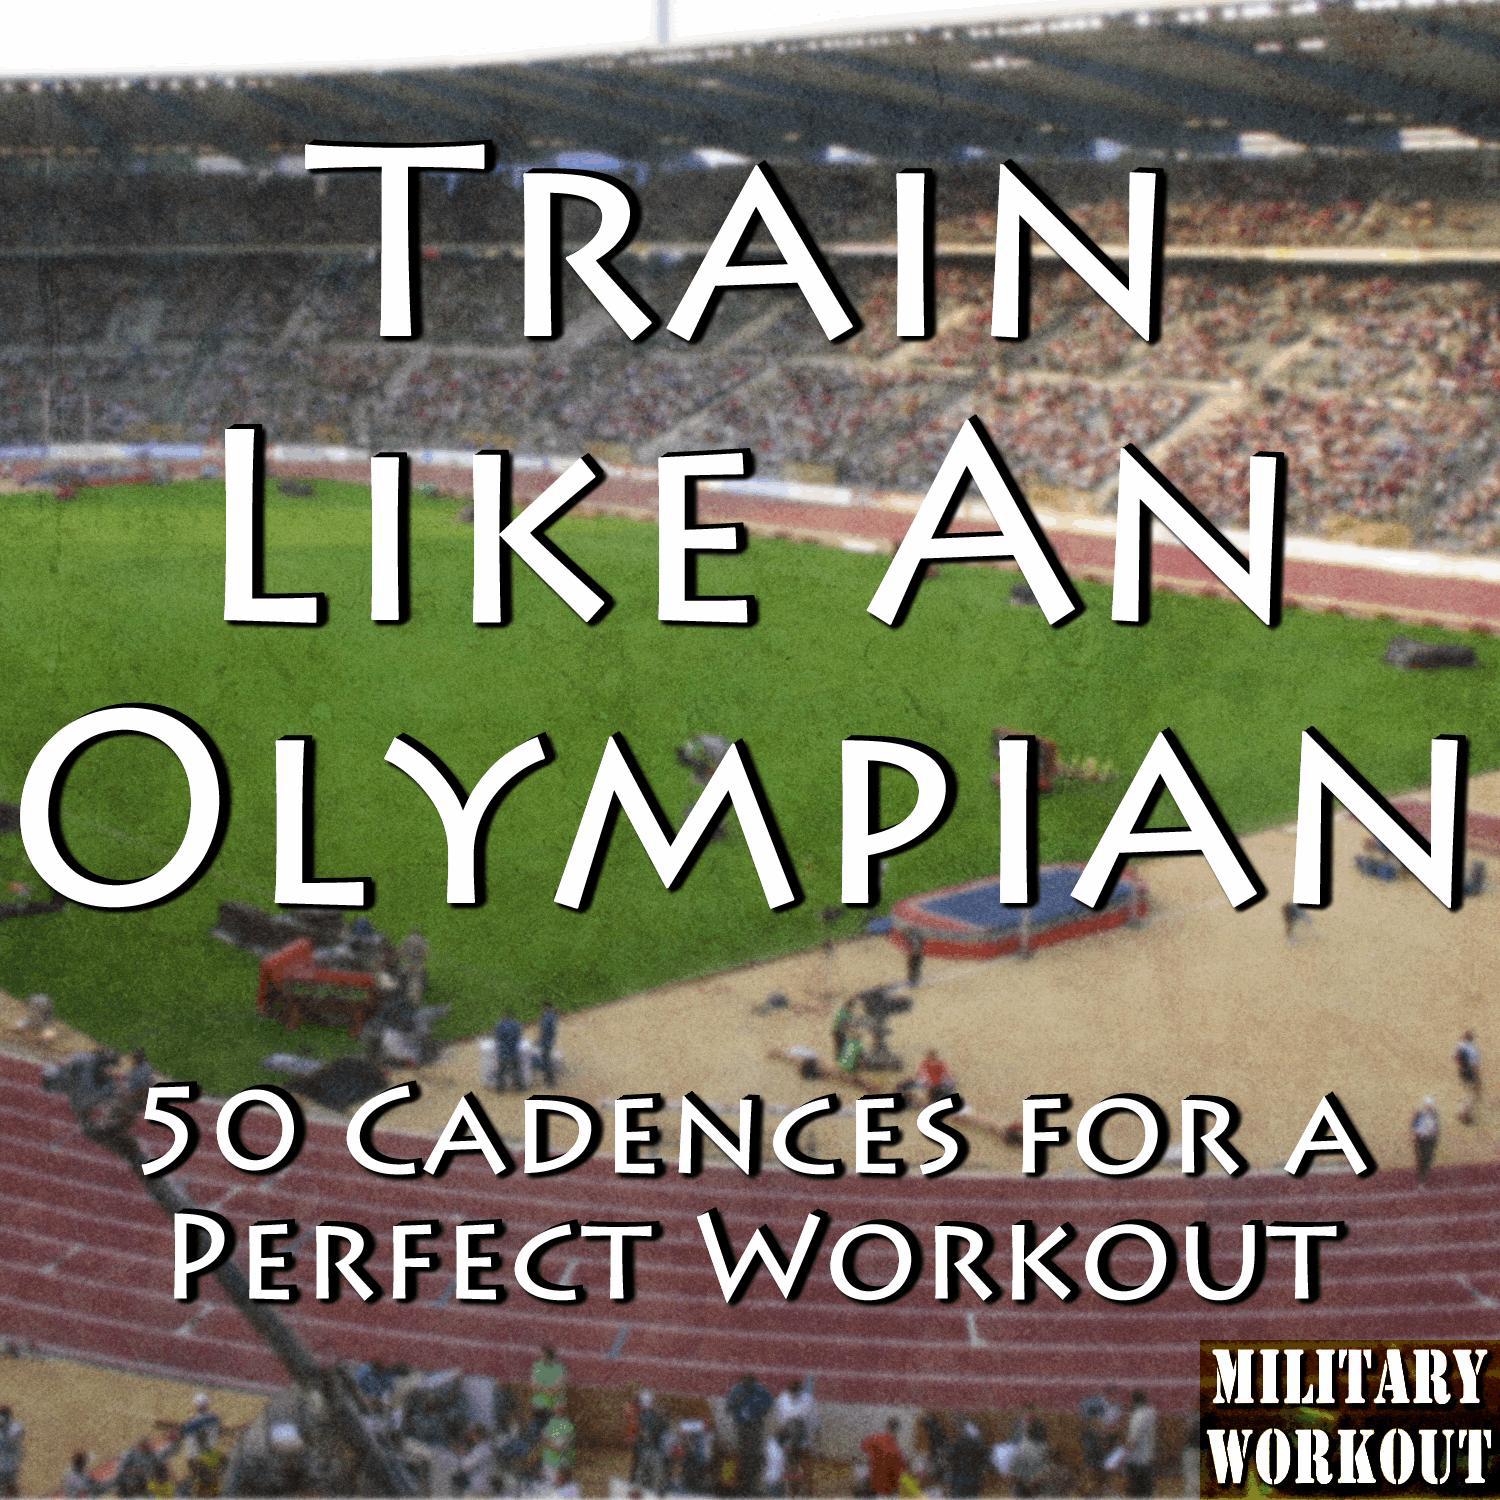 Train Like an Olympian: 50 Cadences for a Perfect Workout